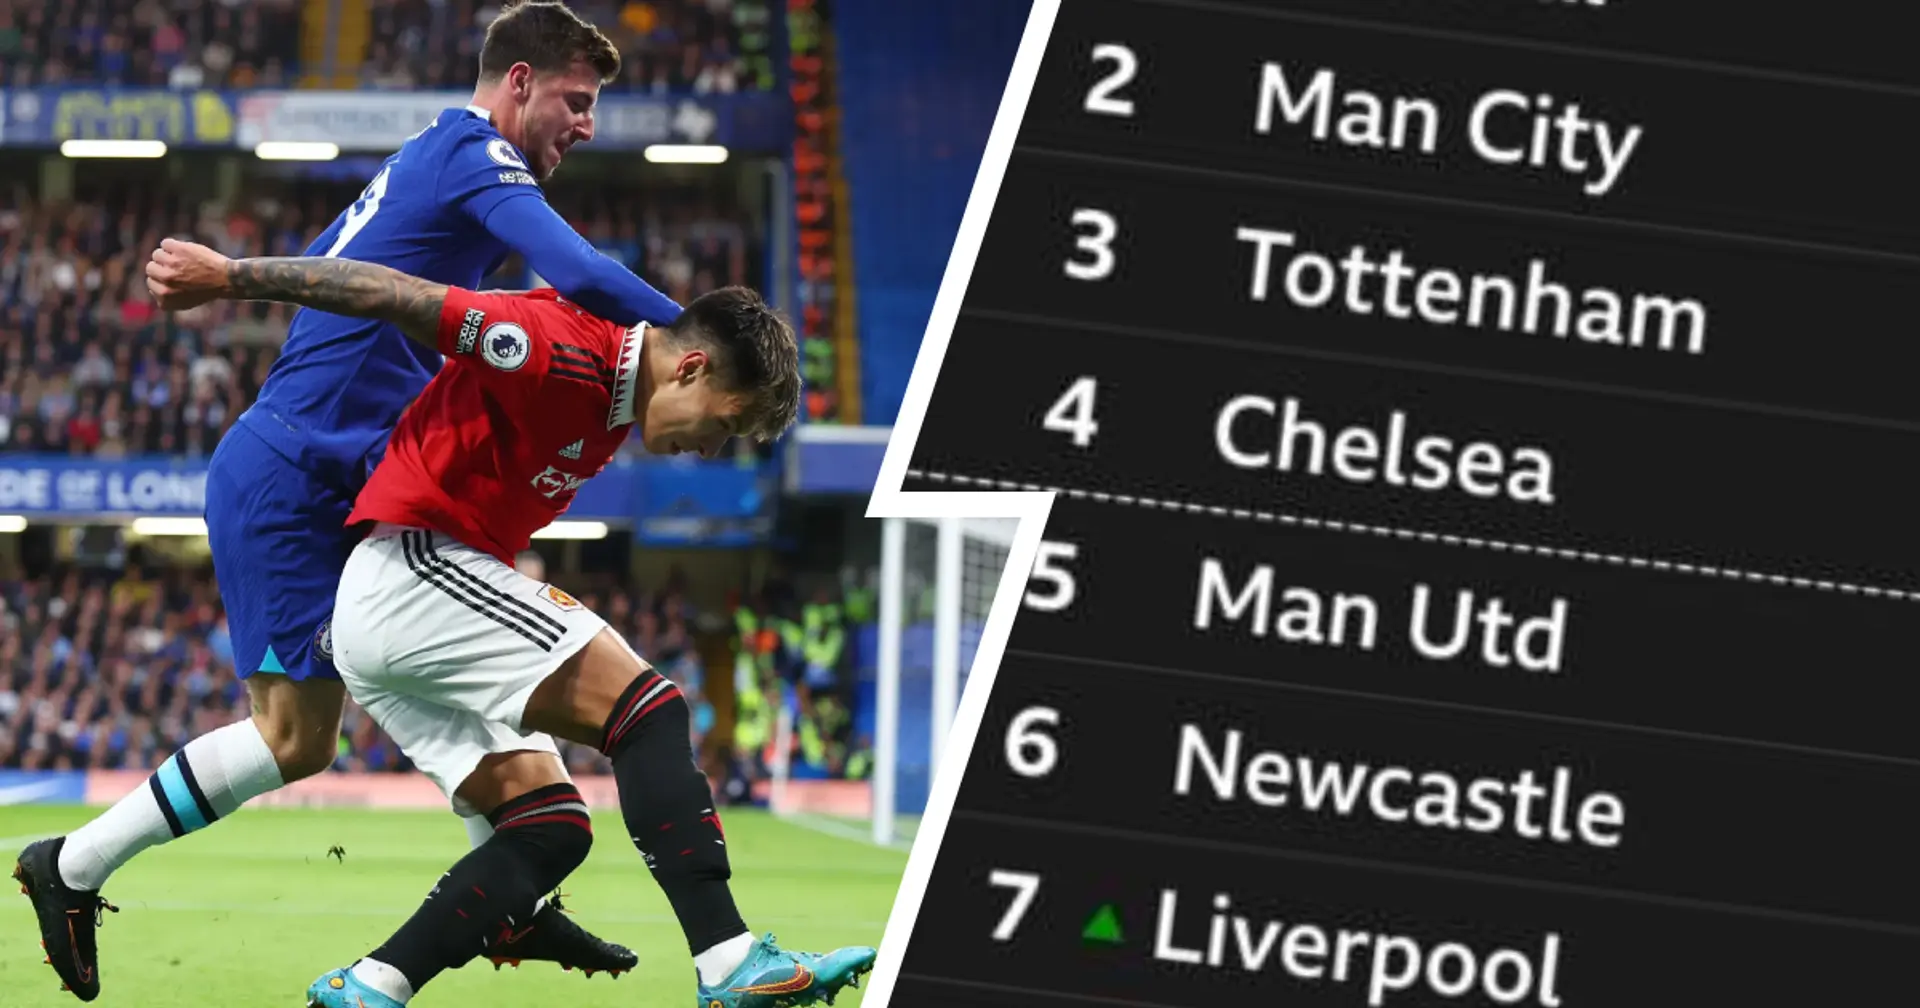 Chelsea still one point ahead of United: Premier League standings after Saturday matches